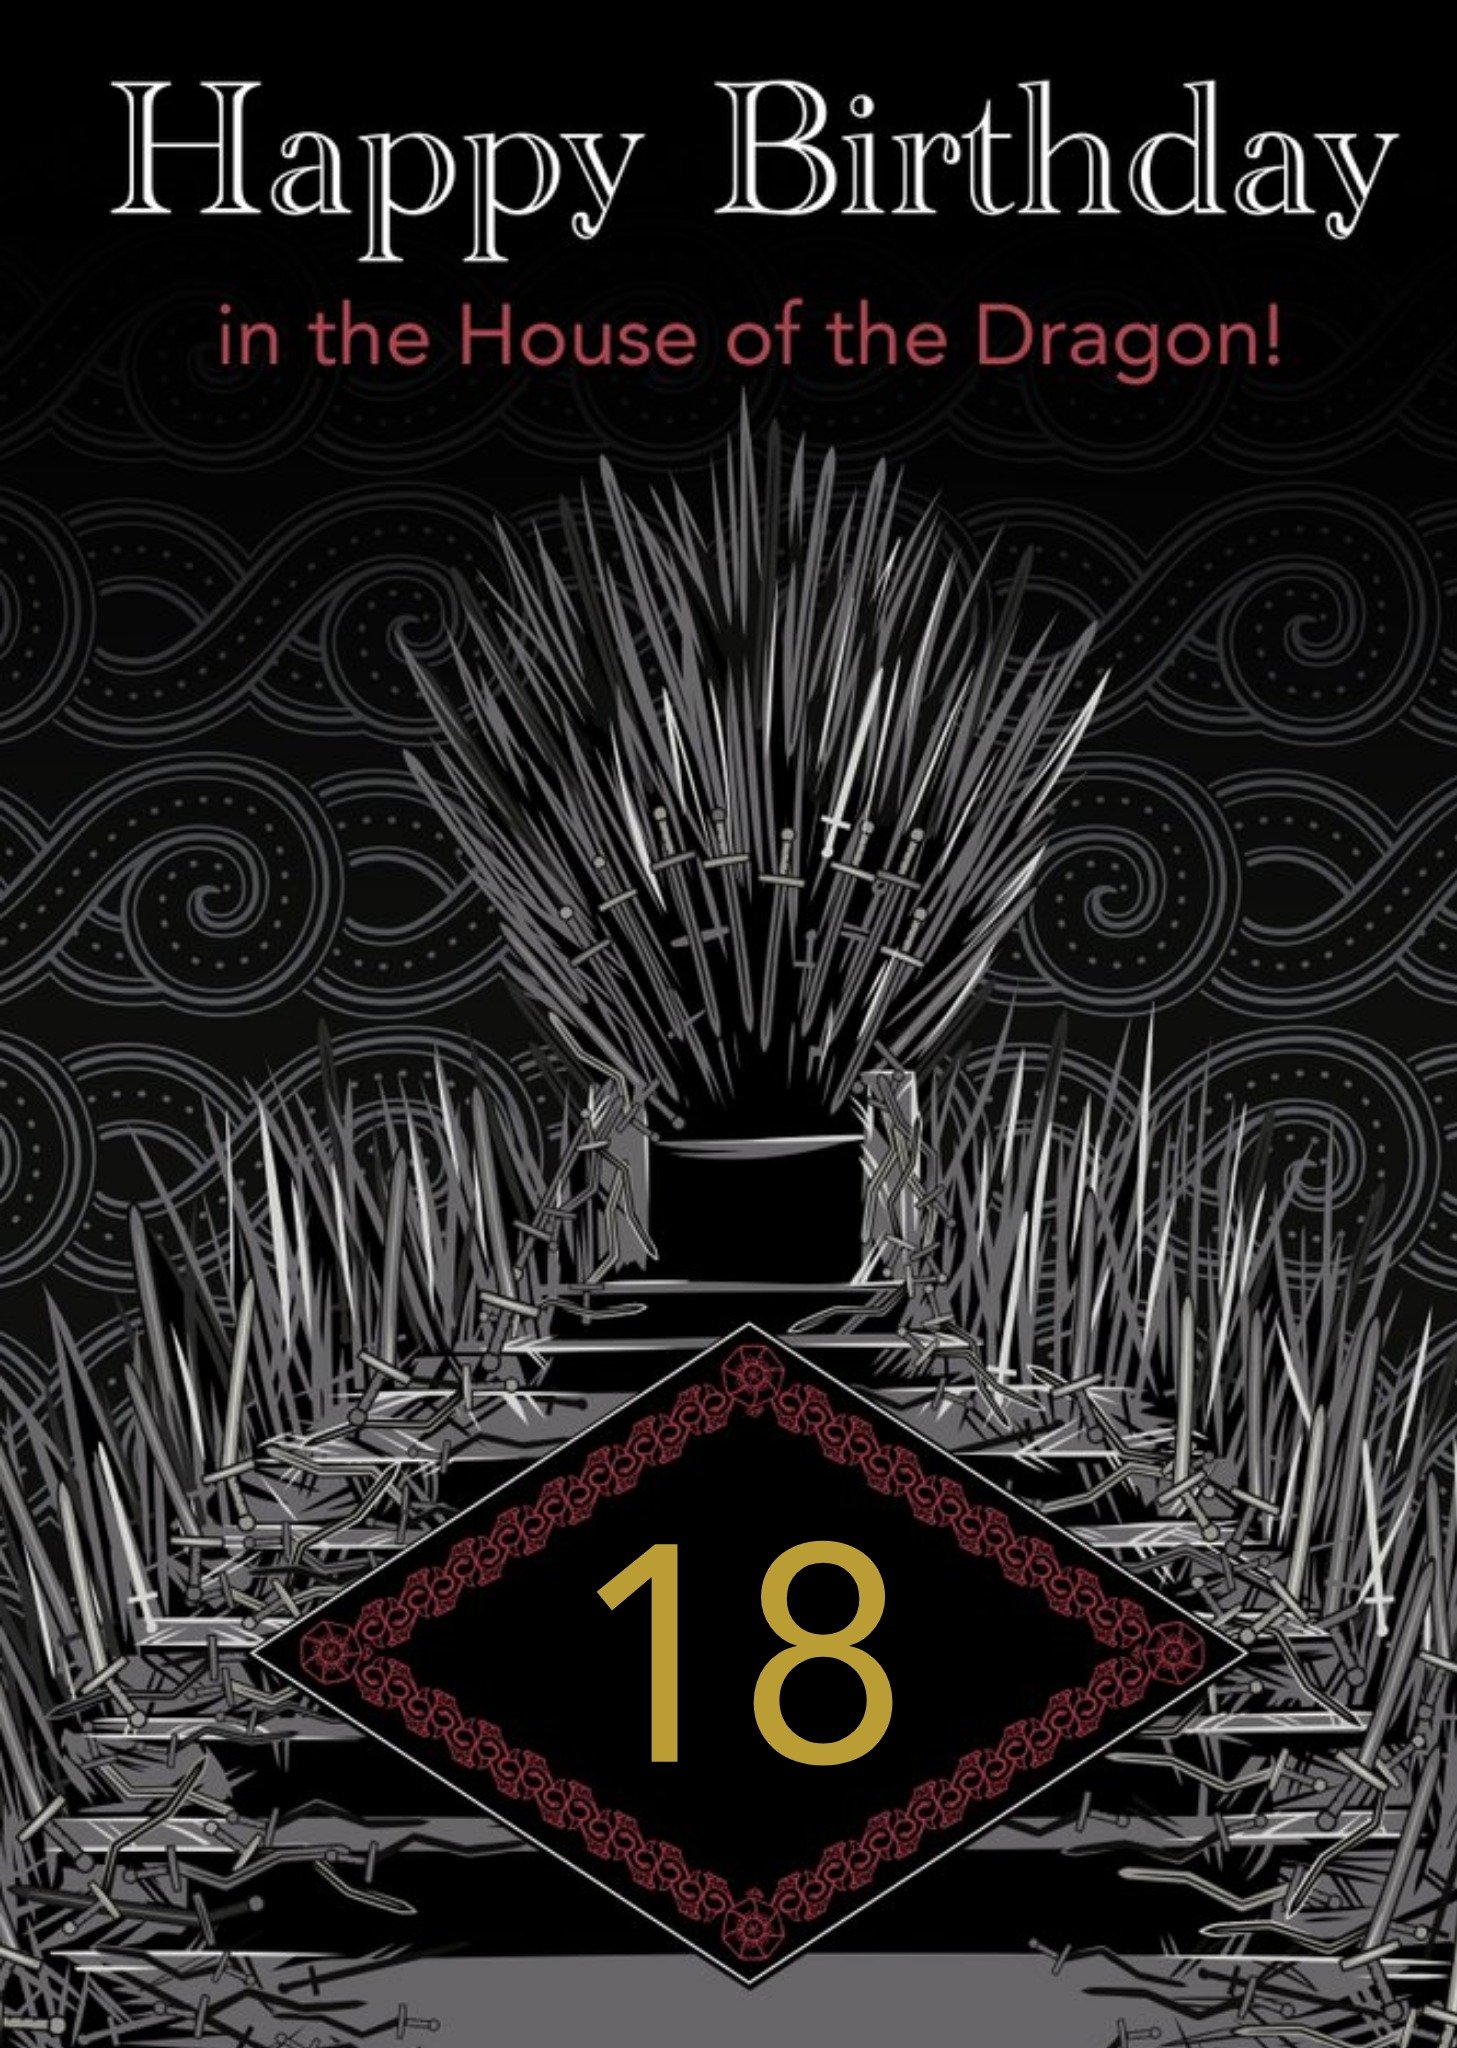 Game Of thrones House Of the Dragon 18th Birthday Card, Large